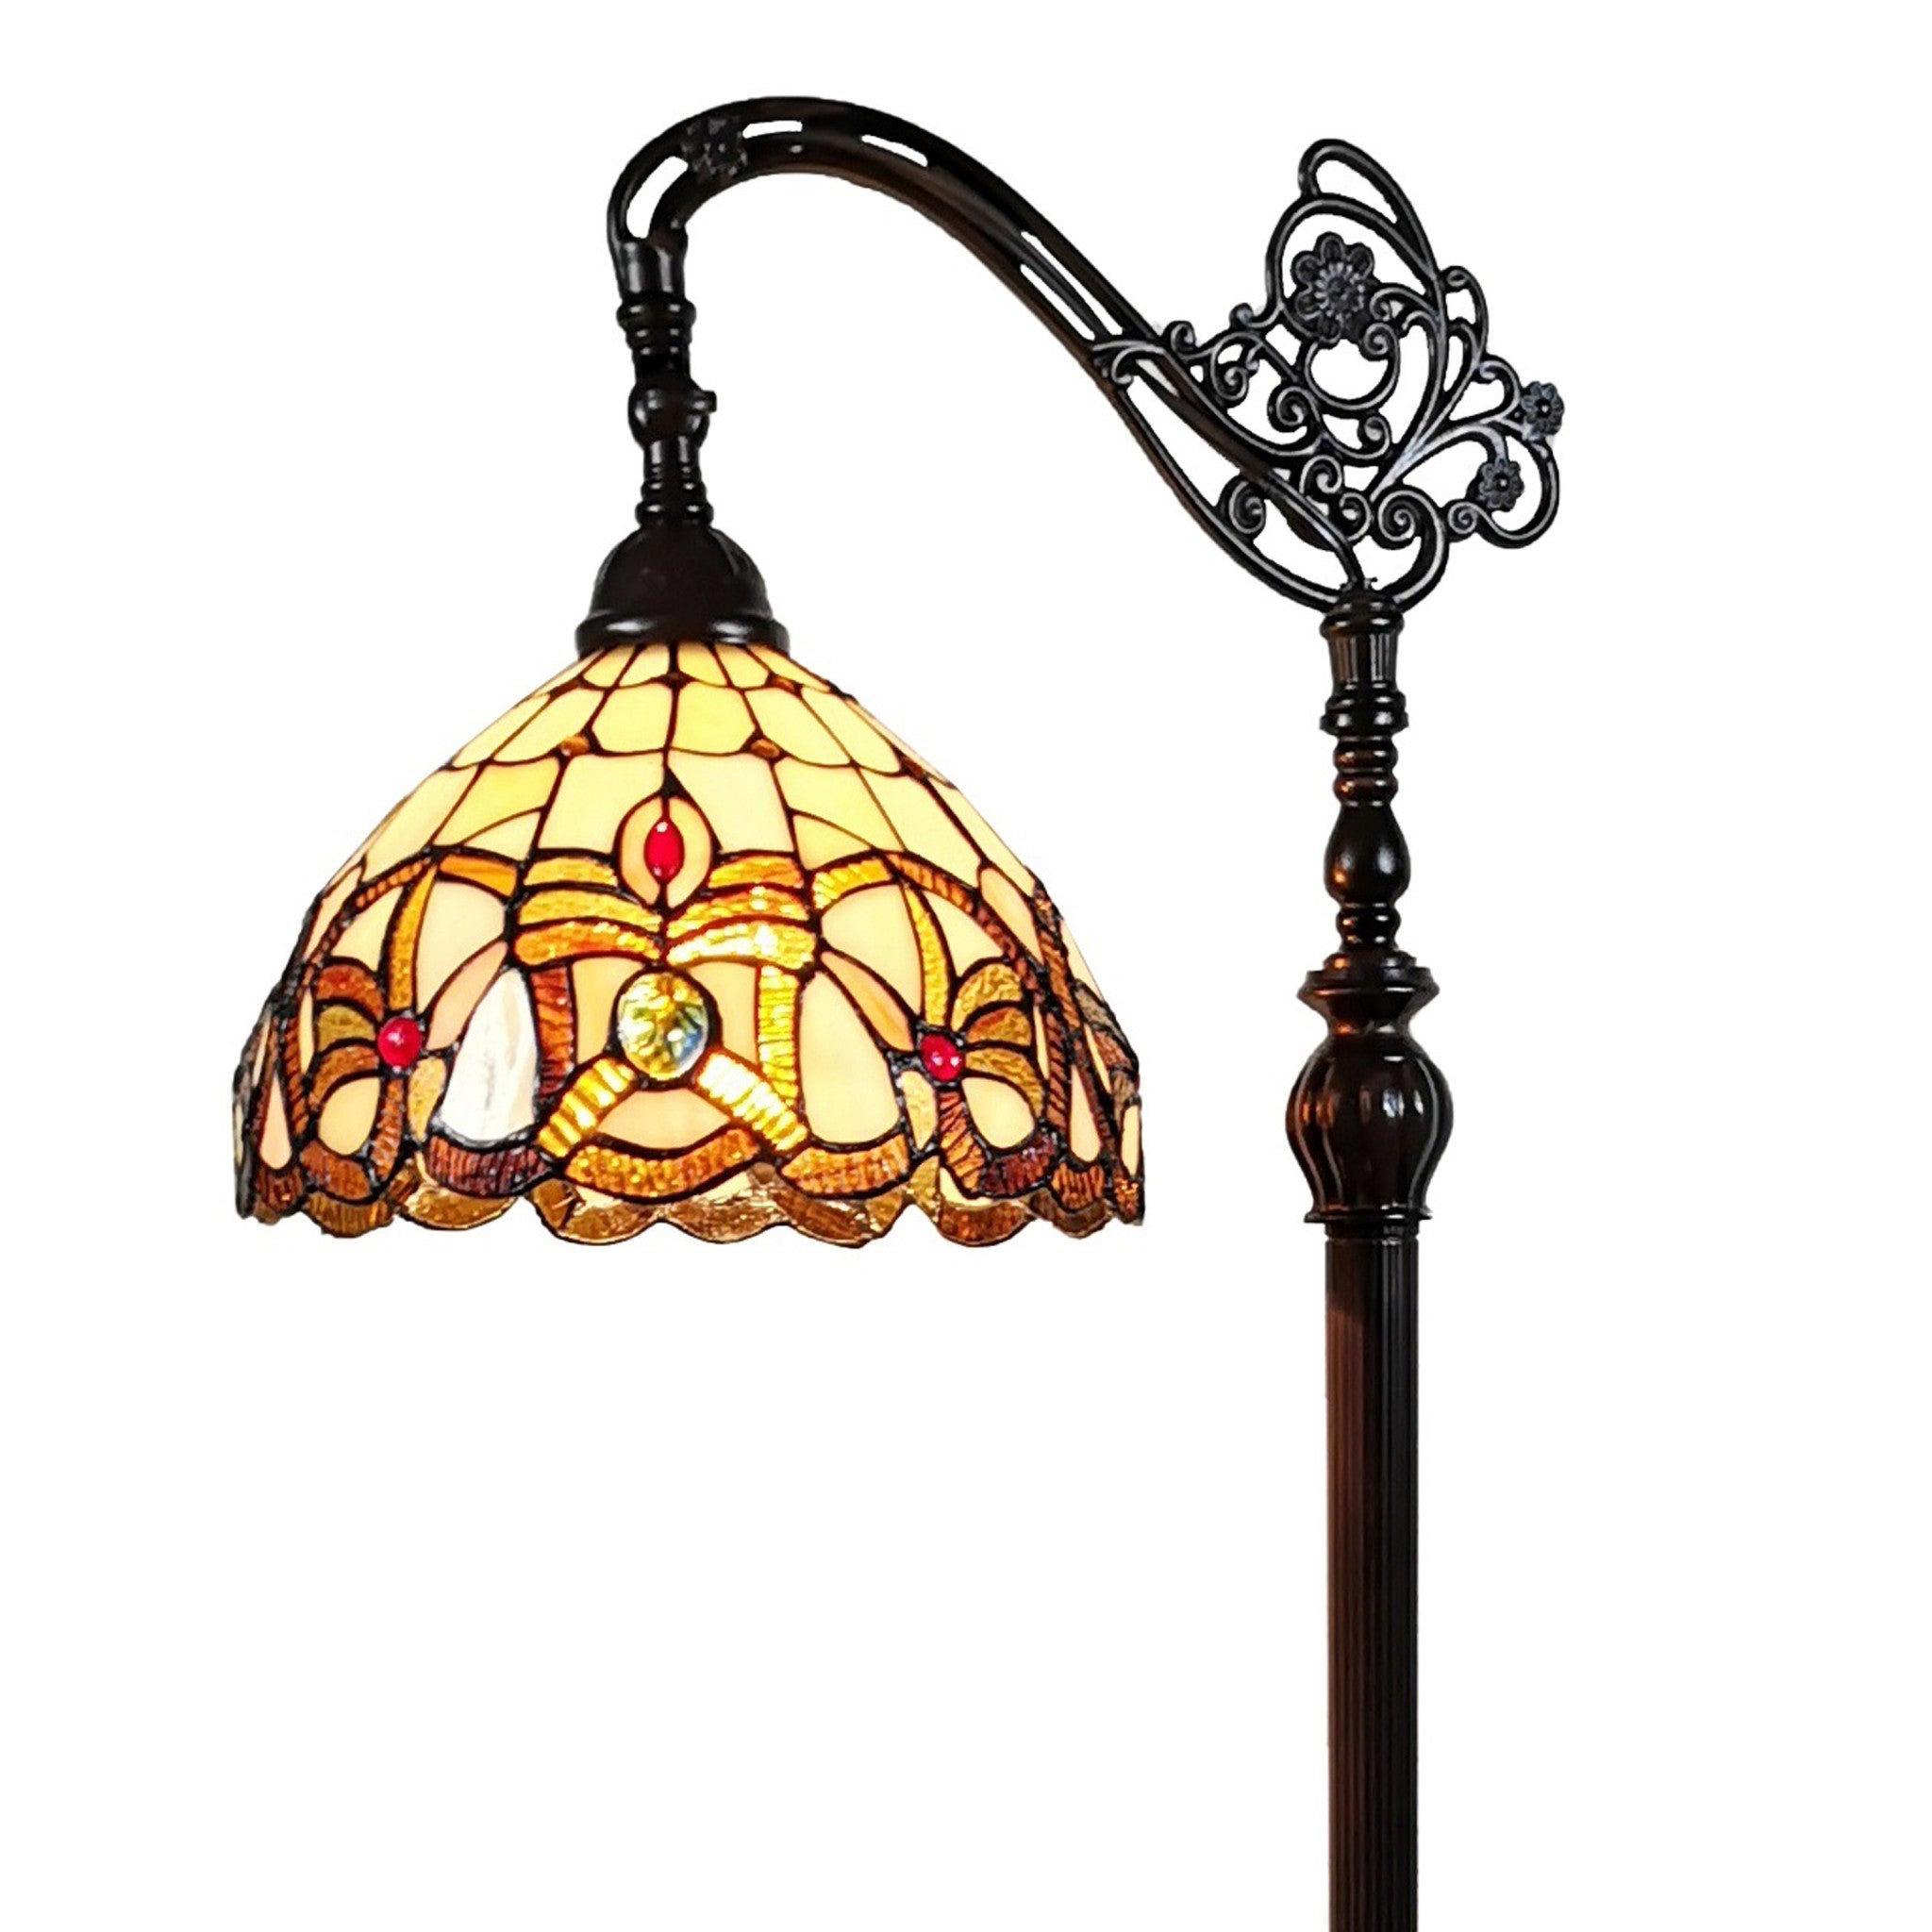 72" Brown Traditional Shaped Floor Lamp With Brown Stained Glass Bowl Shade